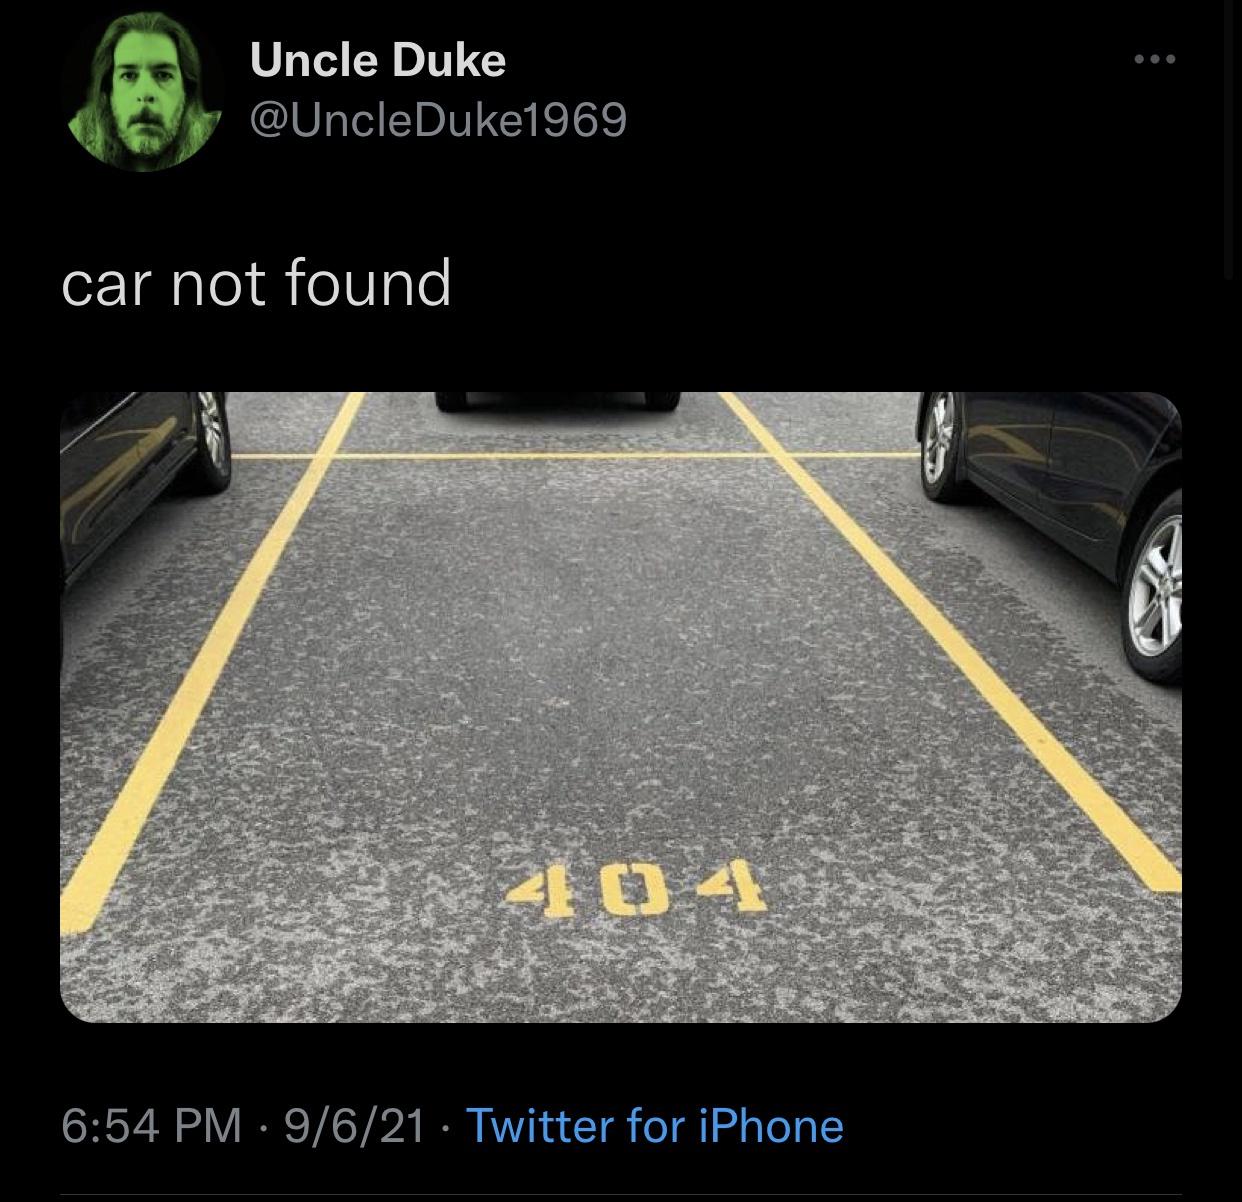 funny memes - funny pictures - car - Uncle Duke car not found 2104 9621 Twitter for iPhone